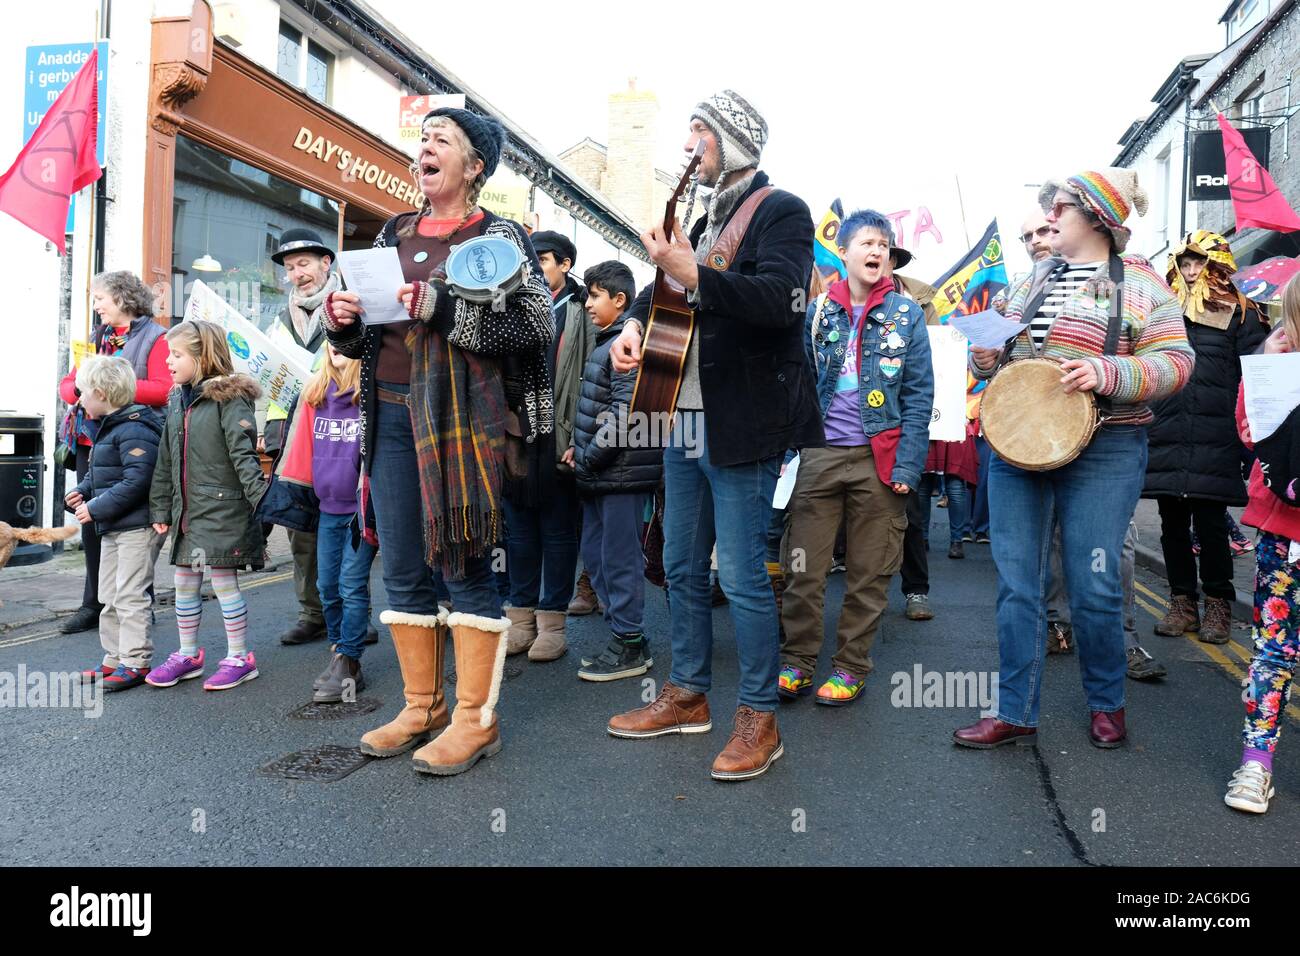 Hay on Wye, Powys, Wales, UK. 1st Dec, 2019. Extinction Rebellion ( XR ) protesters march through Hay-on-Wye town to support Rupert Read an XR spokesman who will speak at the Winter Weekend at 1pm. Credit: Steven May/Alamy Live News Stock Photo